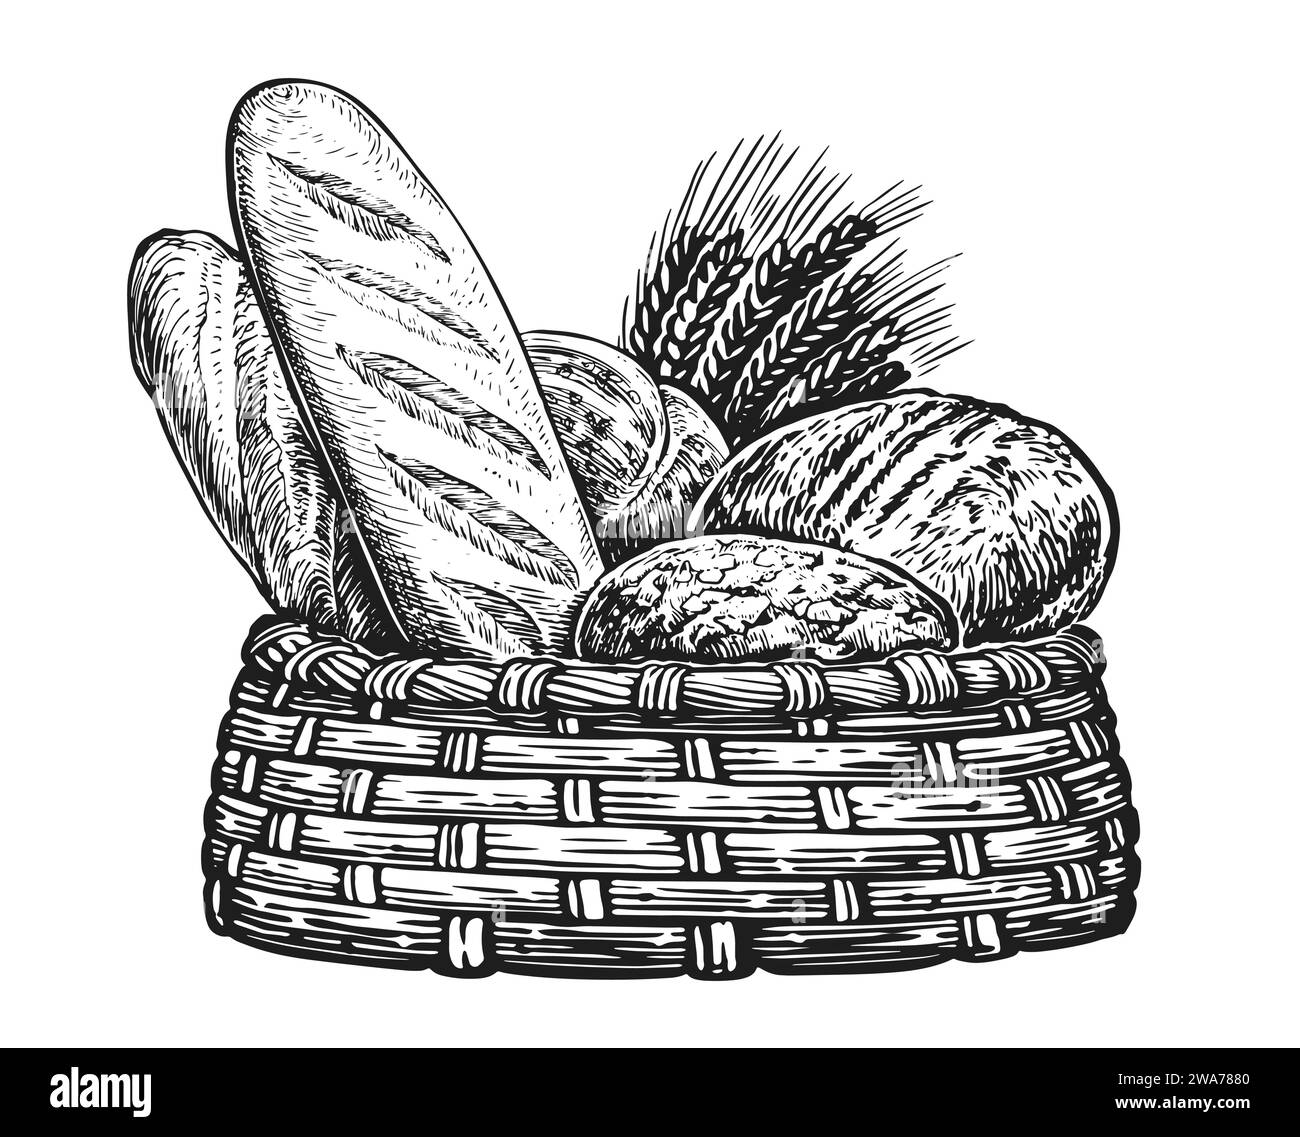 Breads and ears of wheat sketch illustration. Fresh baked goods in basket, vintage Stock Vector